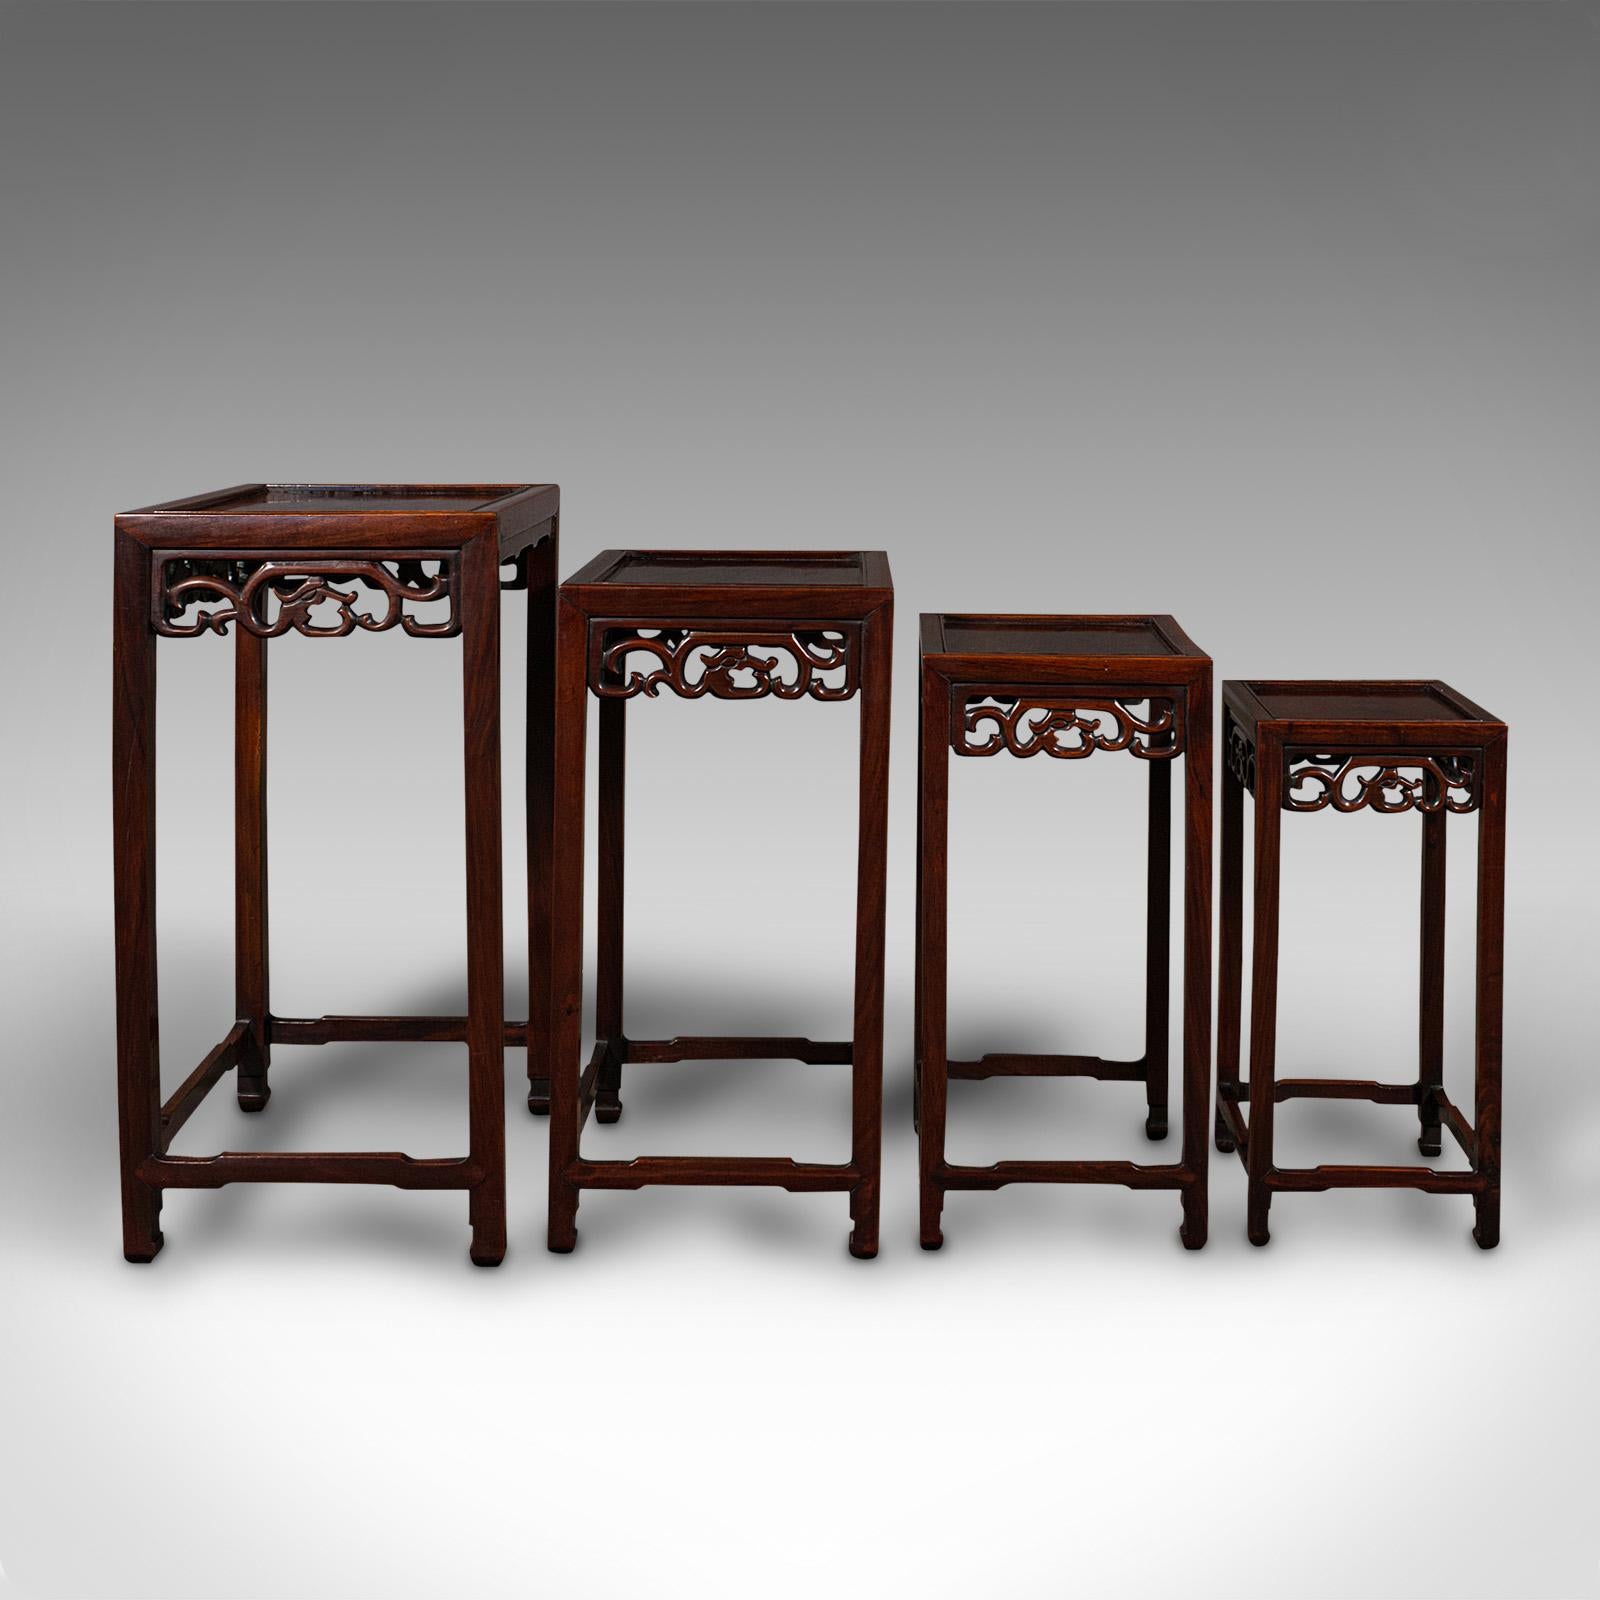 This is an antique quartetto of nesting tables. A Chinese, rosewood set of occasional tables, dating to the late Victorian period, circa 1900.

Of quality craftsmanship, with appealing late 19th century Chinese motif
Displaying a desirable aged